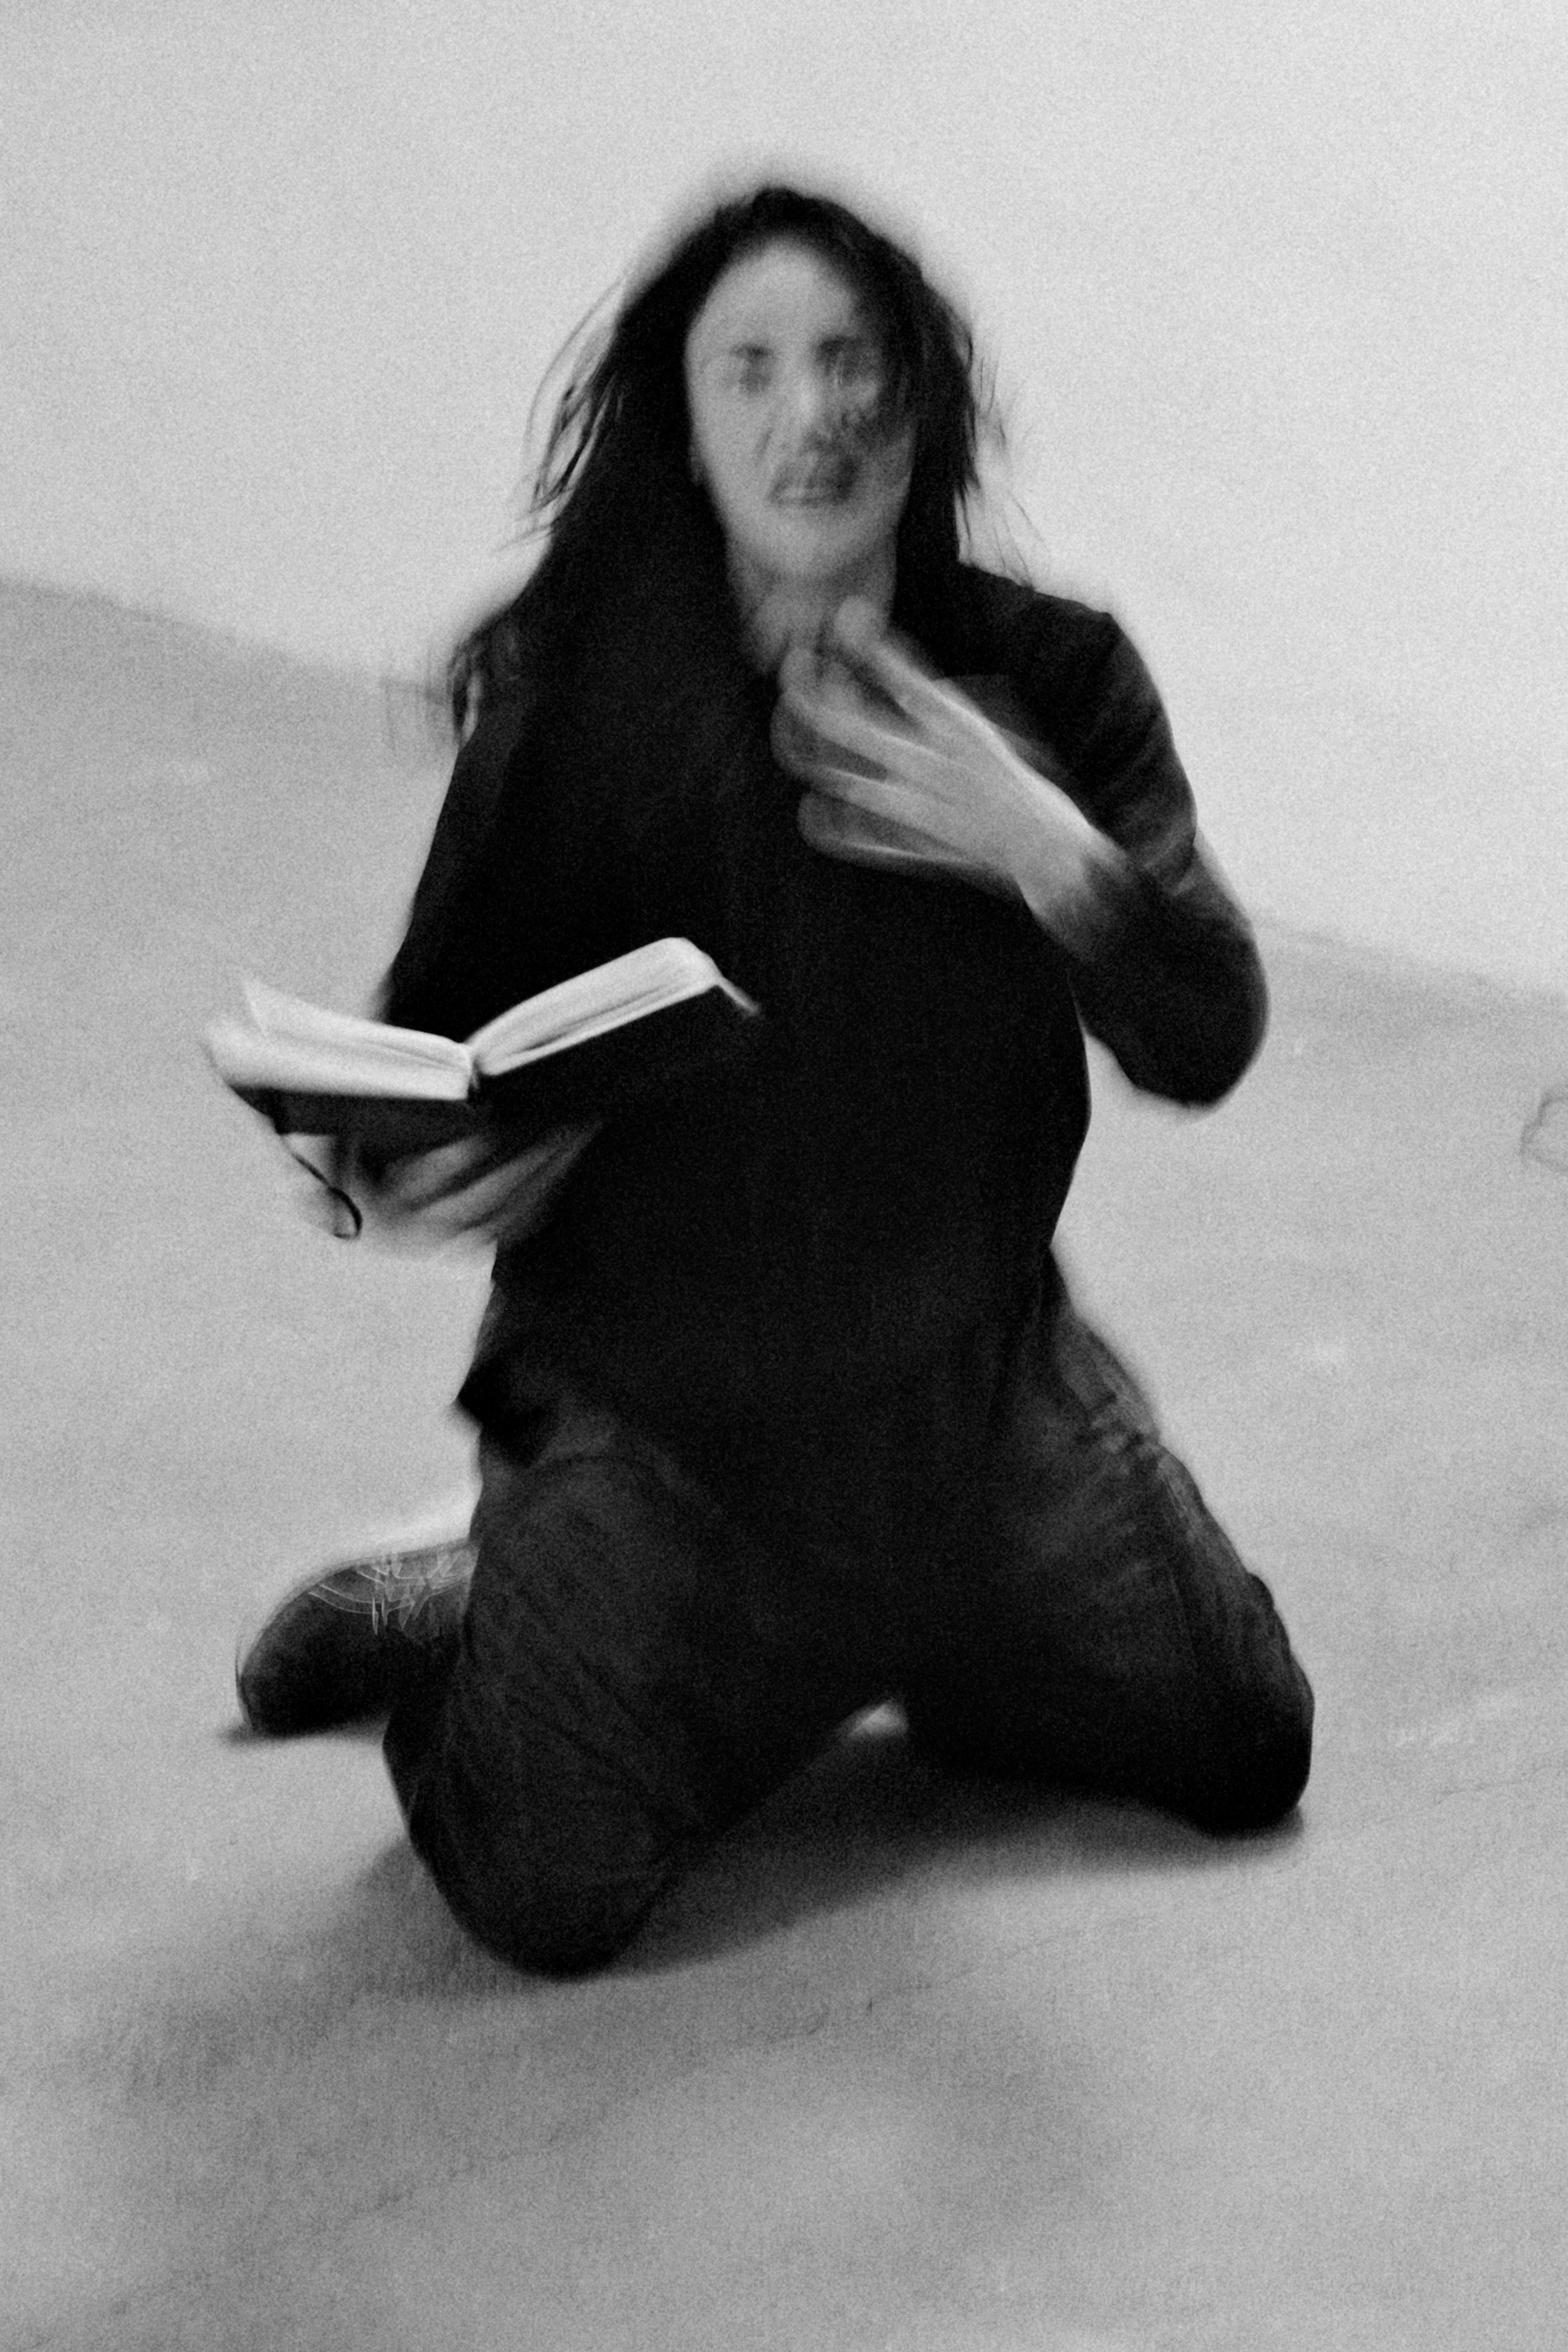 A kneeling woman holds a book in her hand, blurred black and white photo